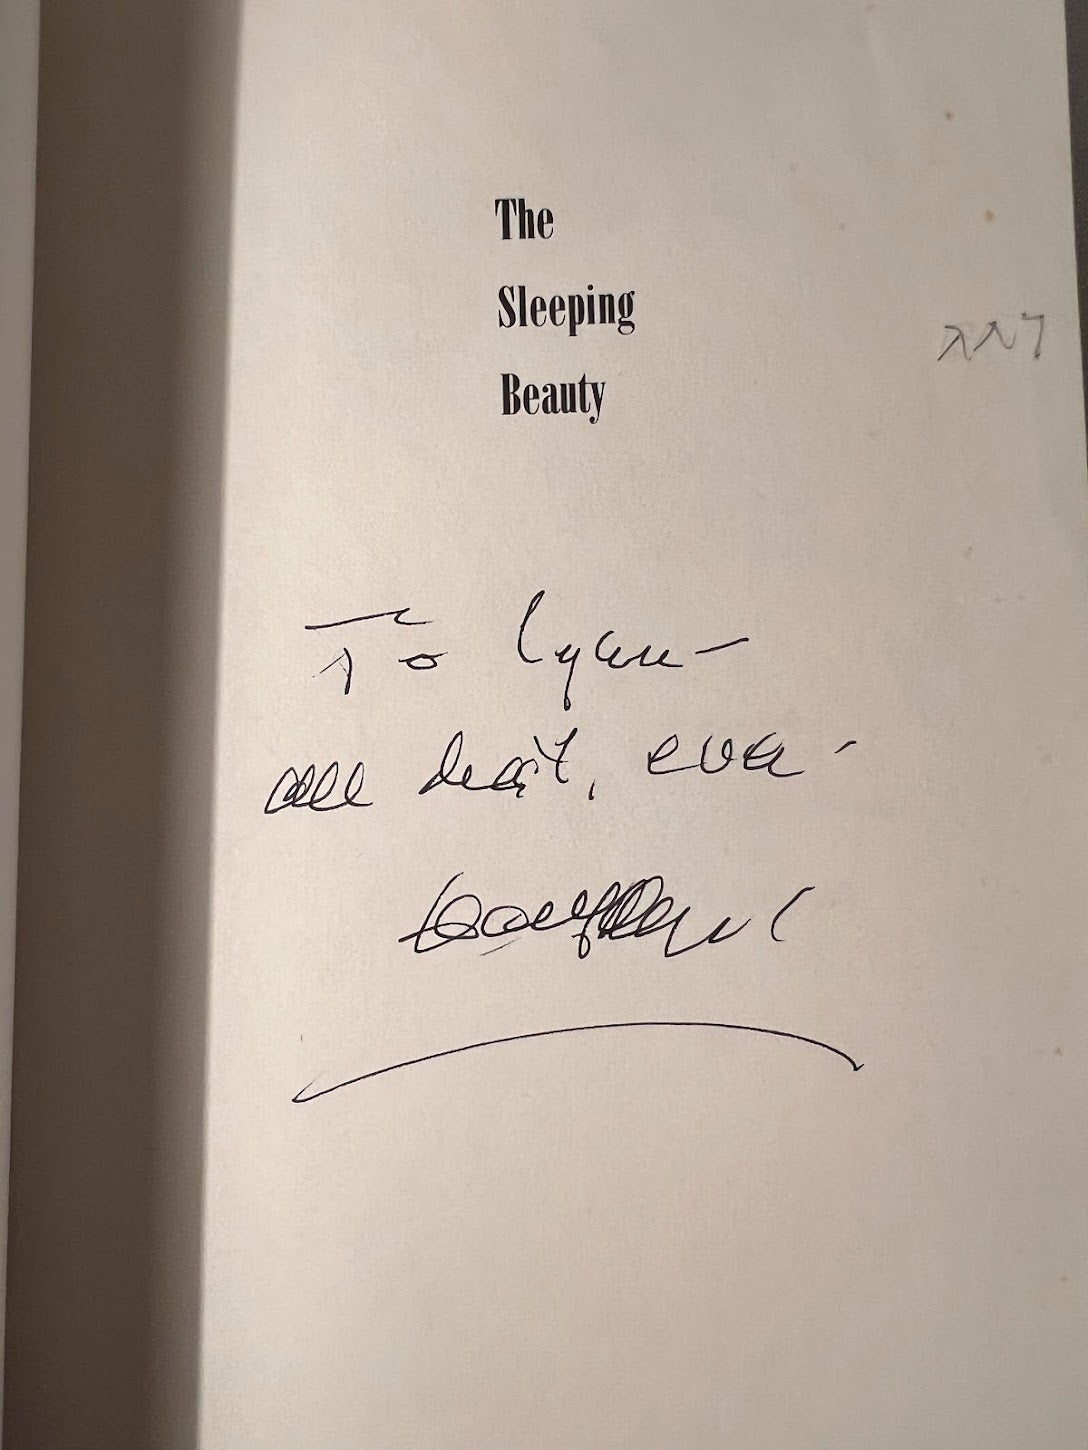 [Signed] The Sleeping Beauty by Hayden Carruth